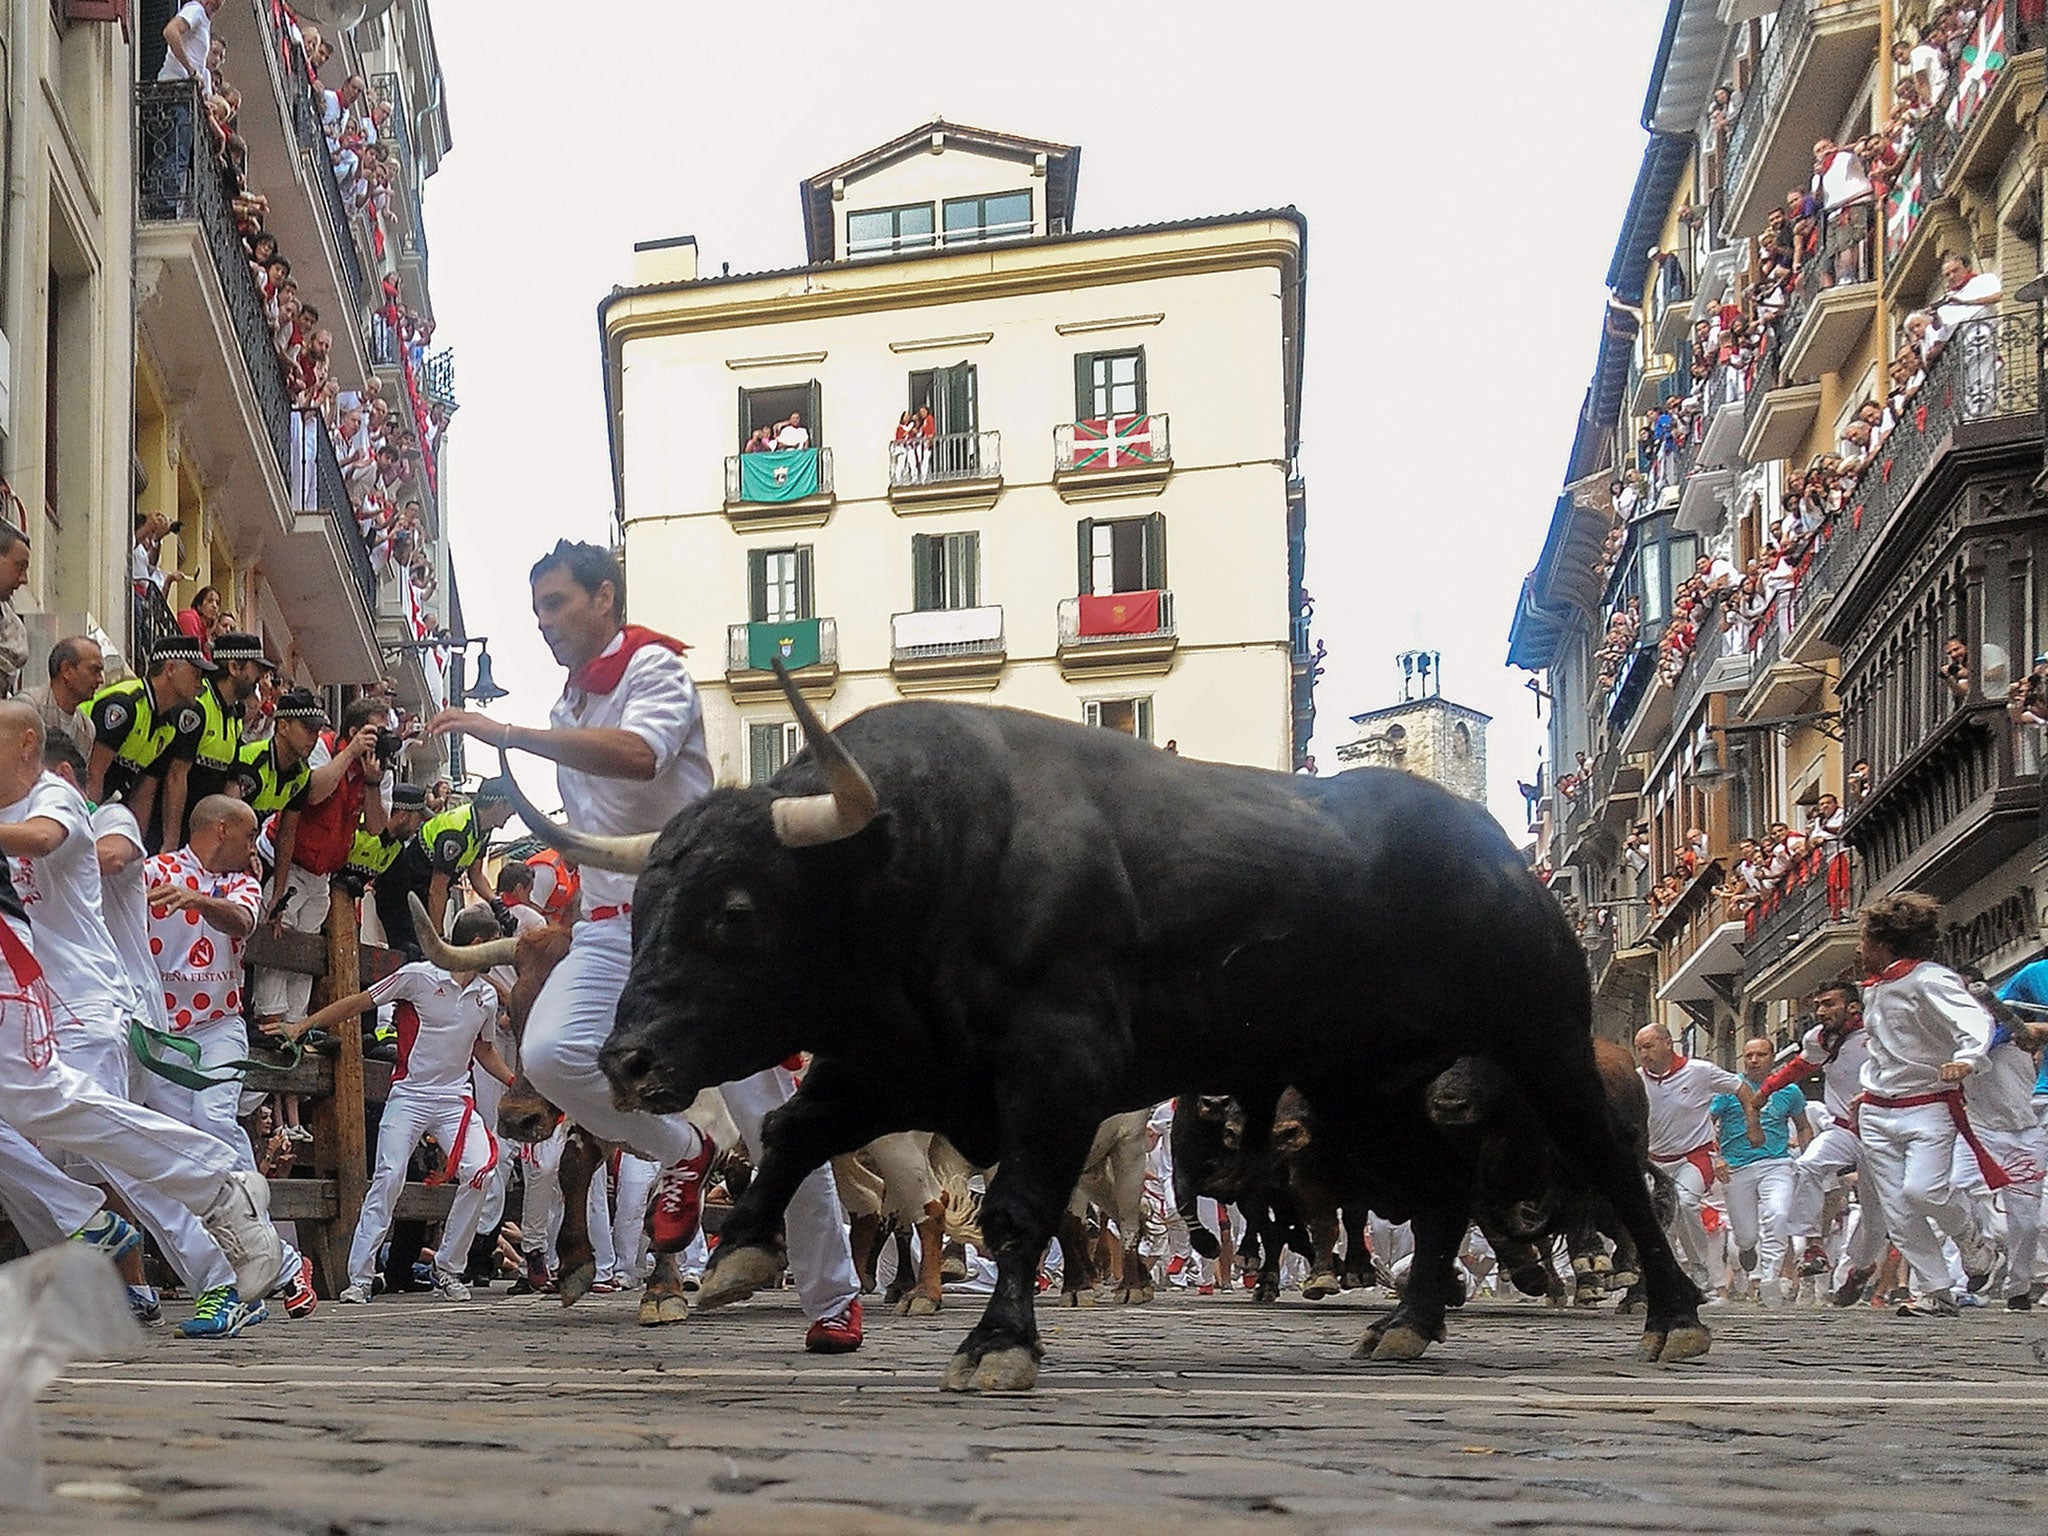 The annual Fiesta de San Fermin, made famous by the 1926 novel of US writer Ernest Hemmingway entitled 'The Sun Also Rises', involves the daily running of the bulls through the historic heart of Pamplona to the bull ring